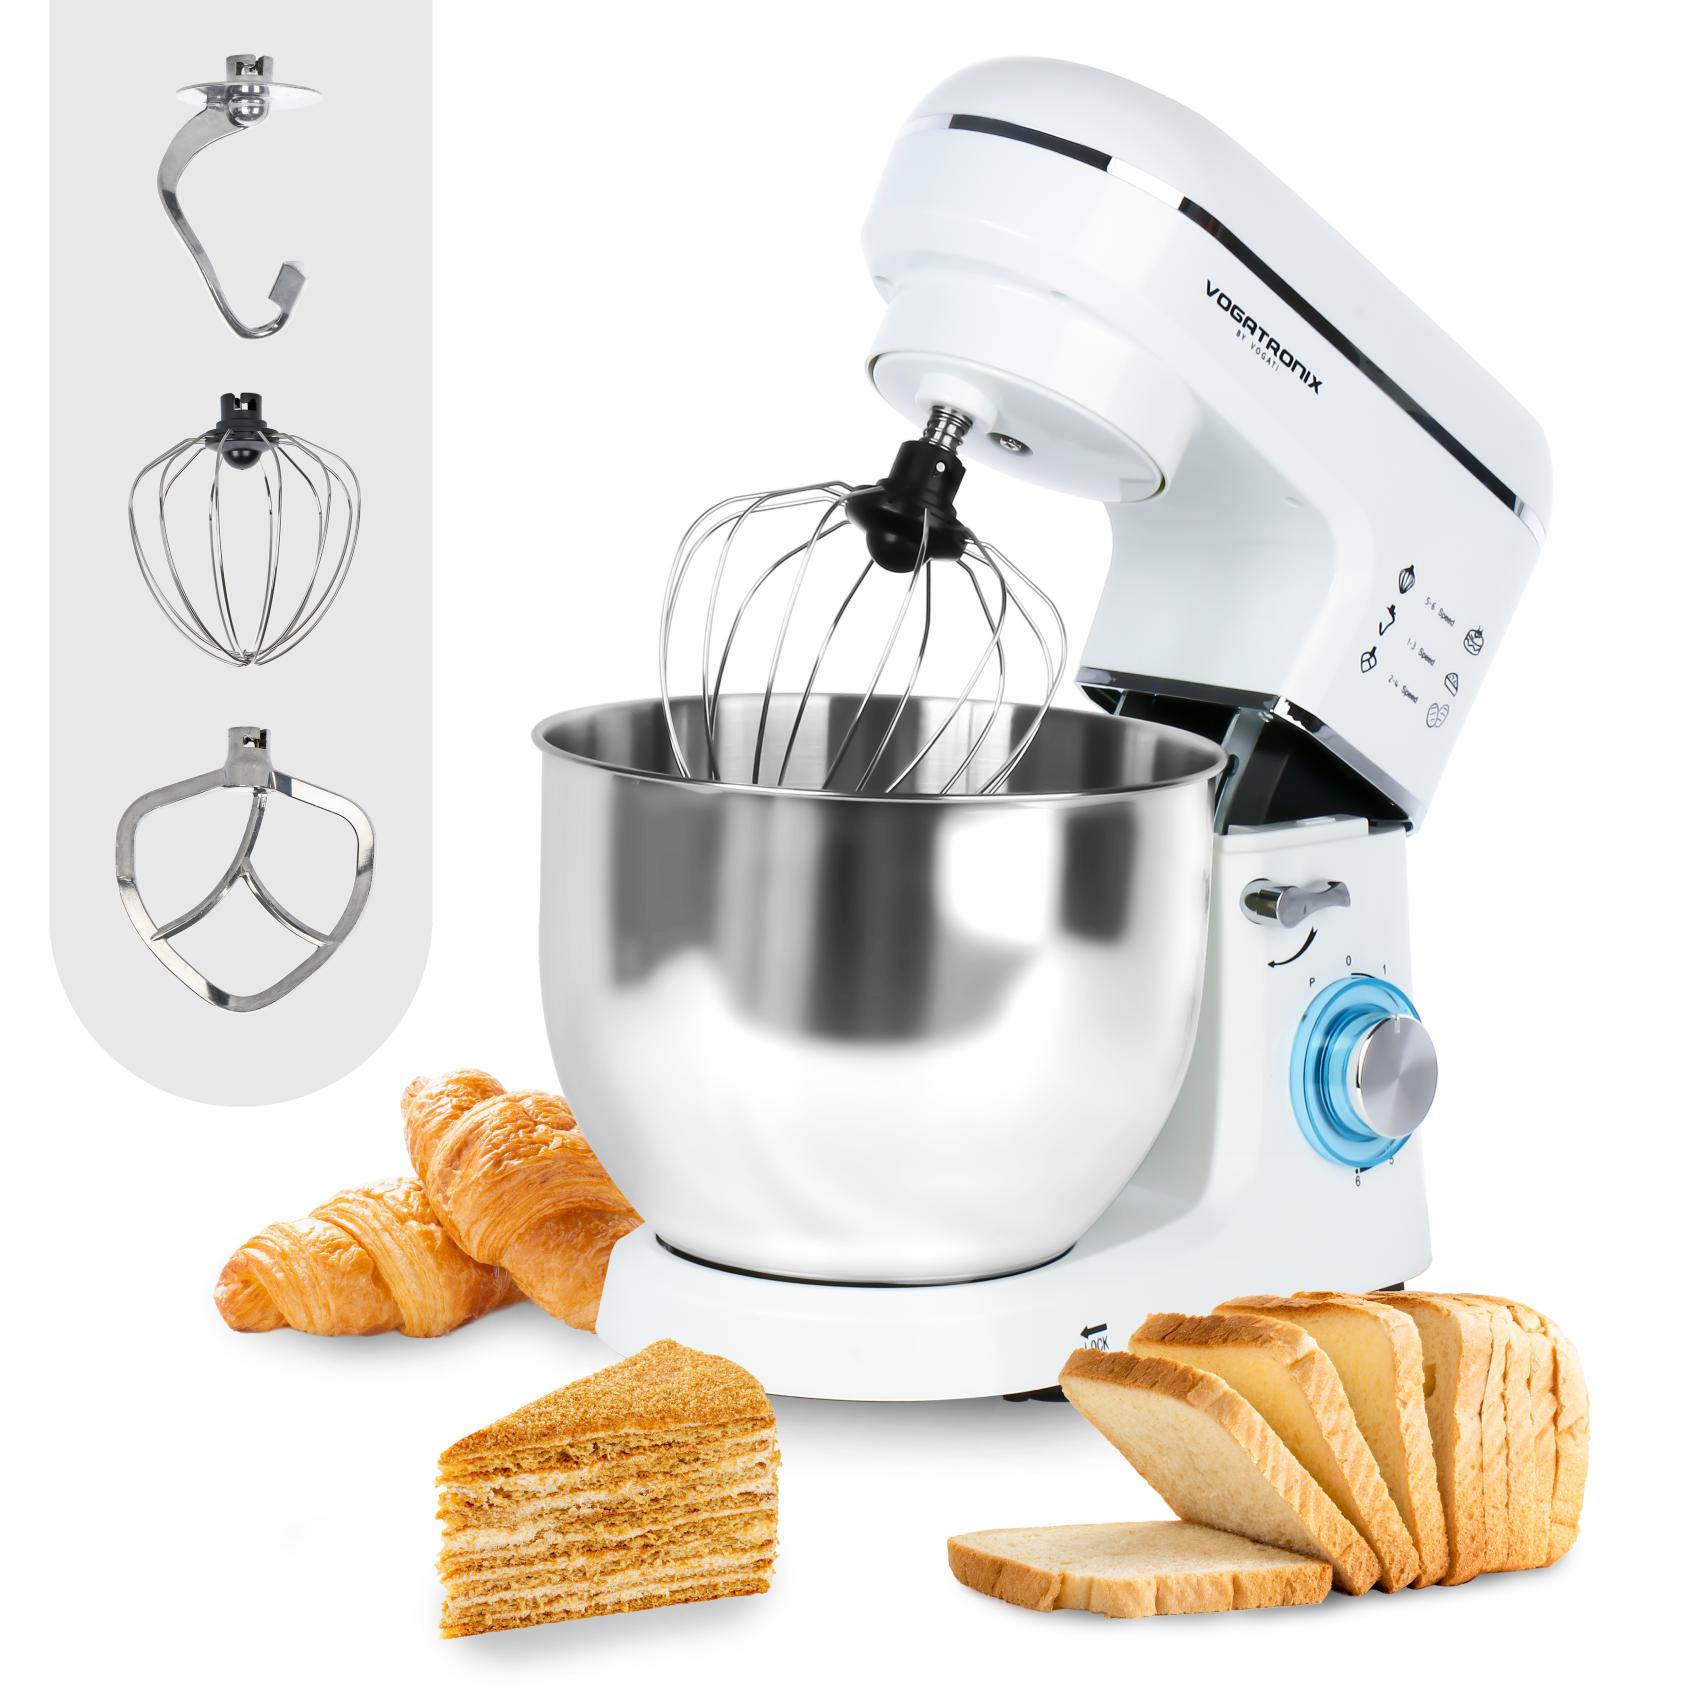 STAND MIXER 1100W KITCHEN MACHINE | ELECTRIC MIXER | 7L STAINLESS STEEL MIXING BOWL WITH LID | 6 SPEEDS | SAFTY SWITCH | DOUGH HOOK- BEATER- WIRE WHIP VE-192